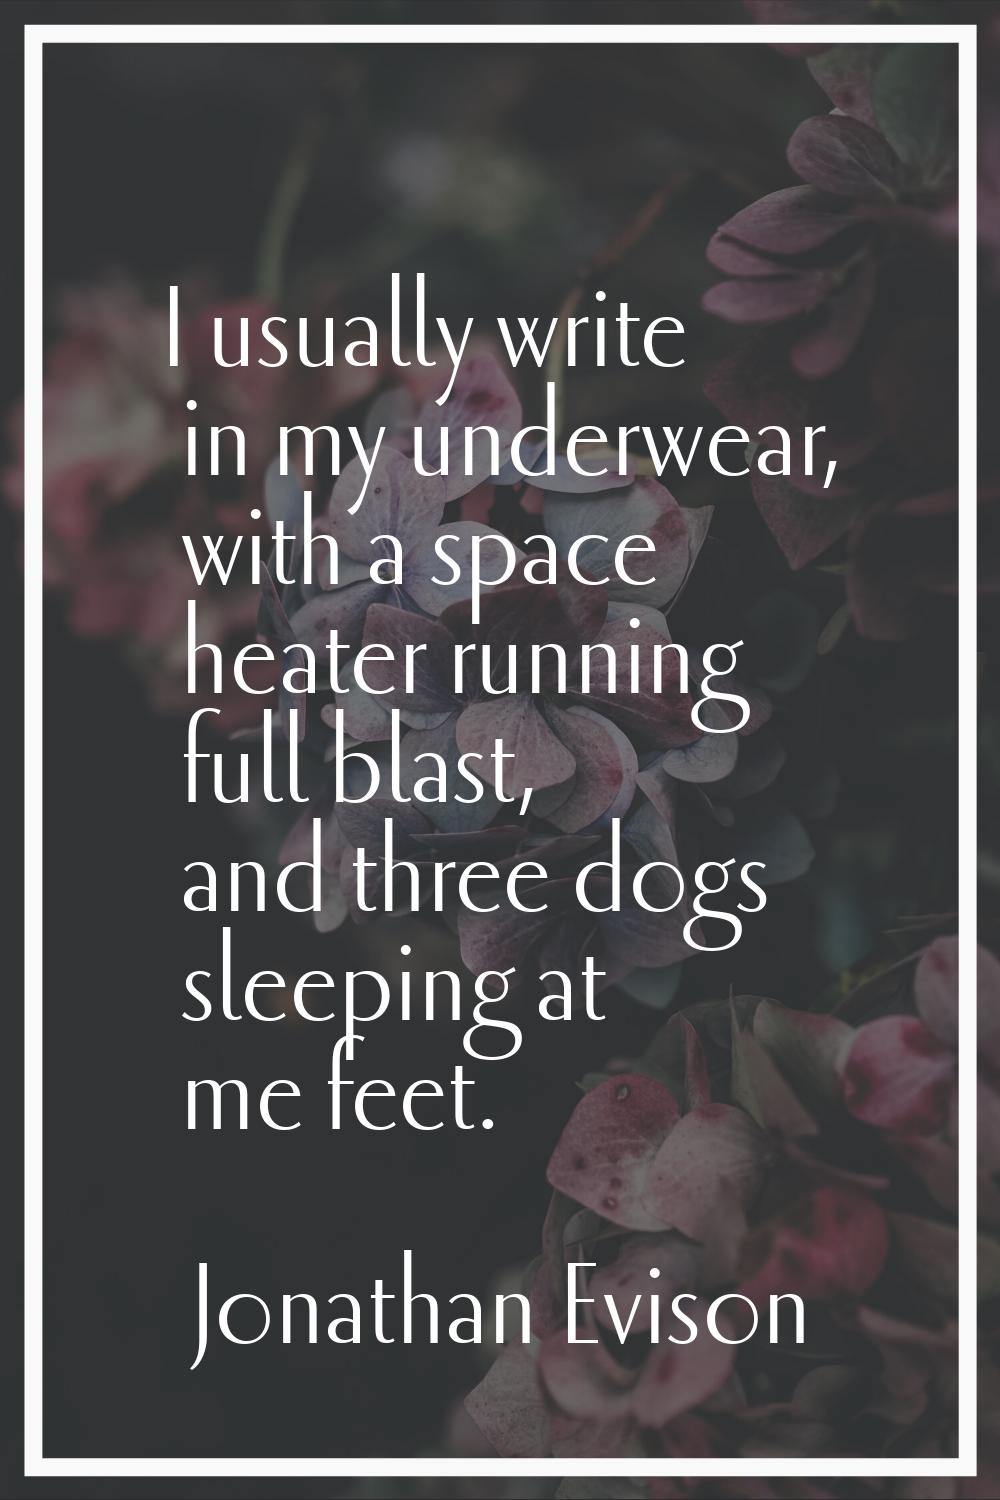 I usually write in my underwear, with a space heater running full blast, and three dogs sleeping at